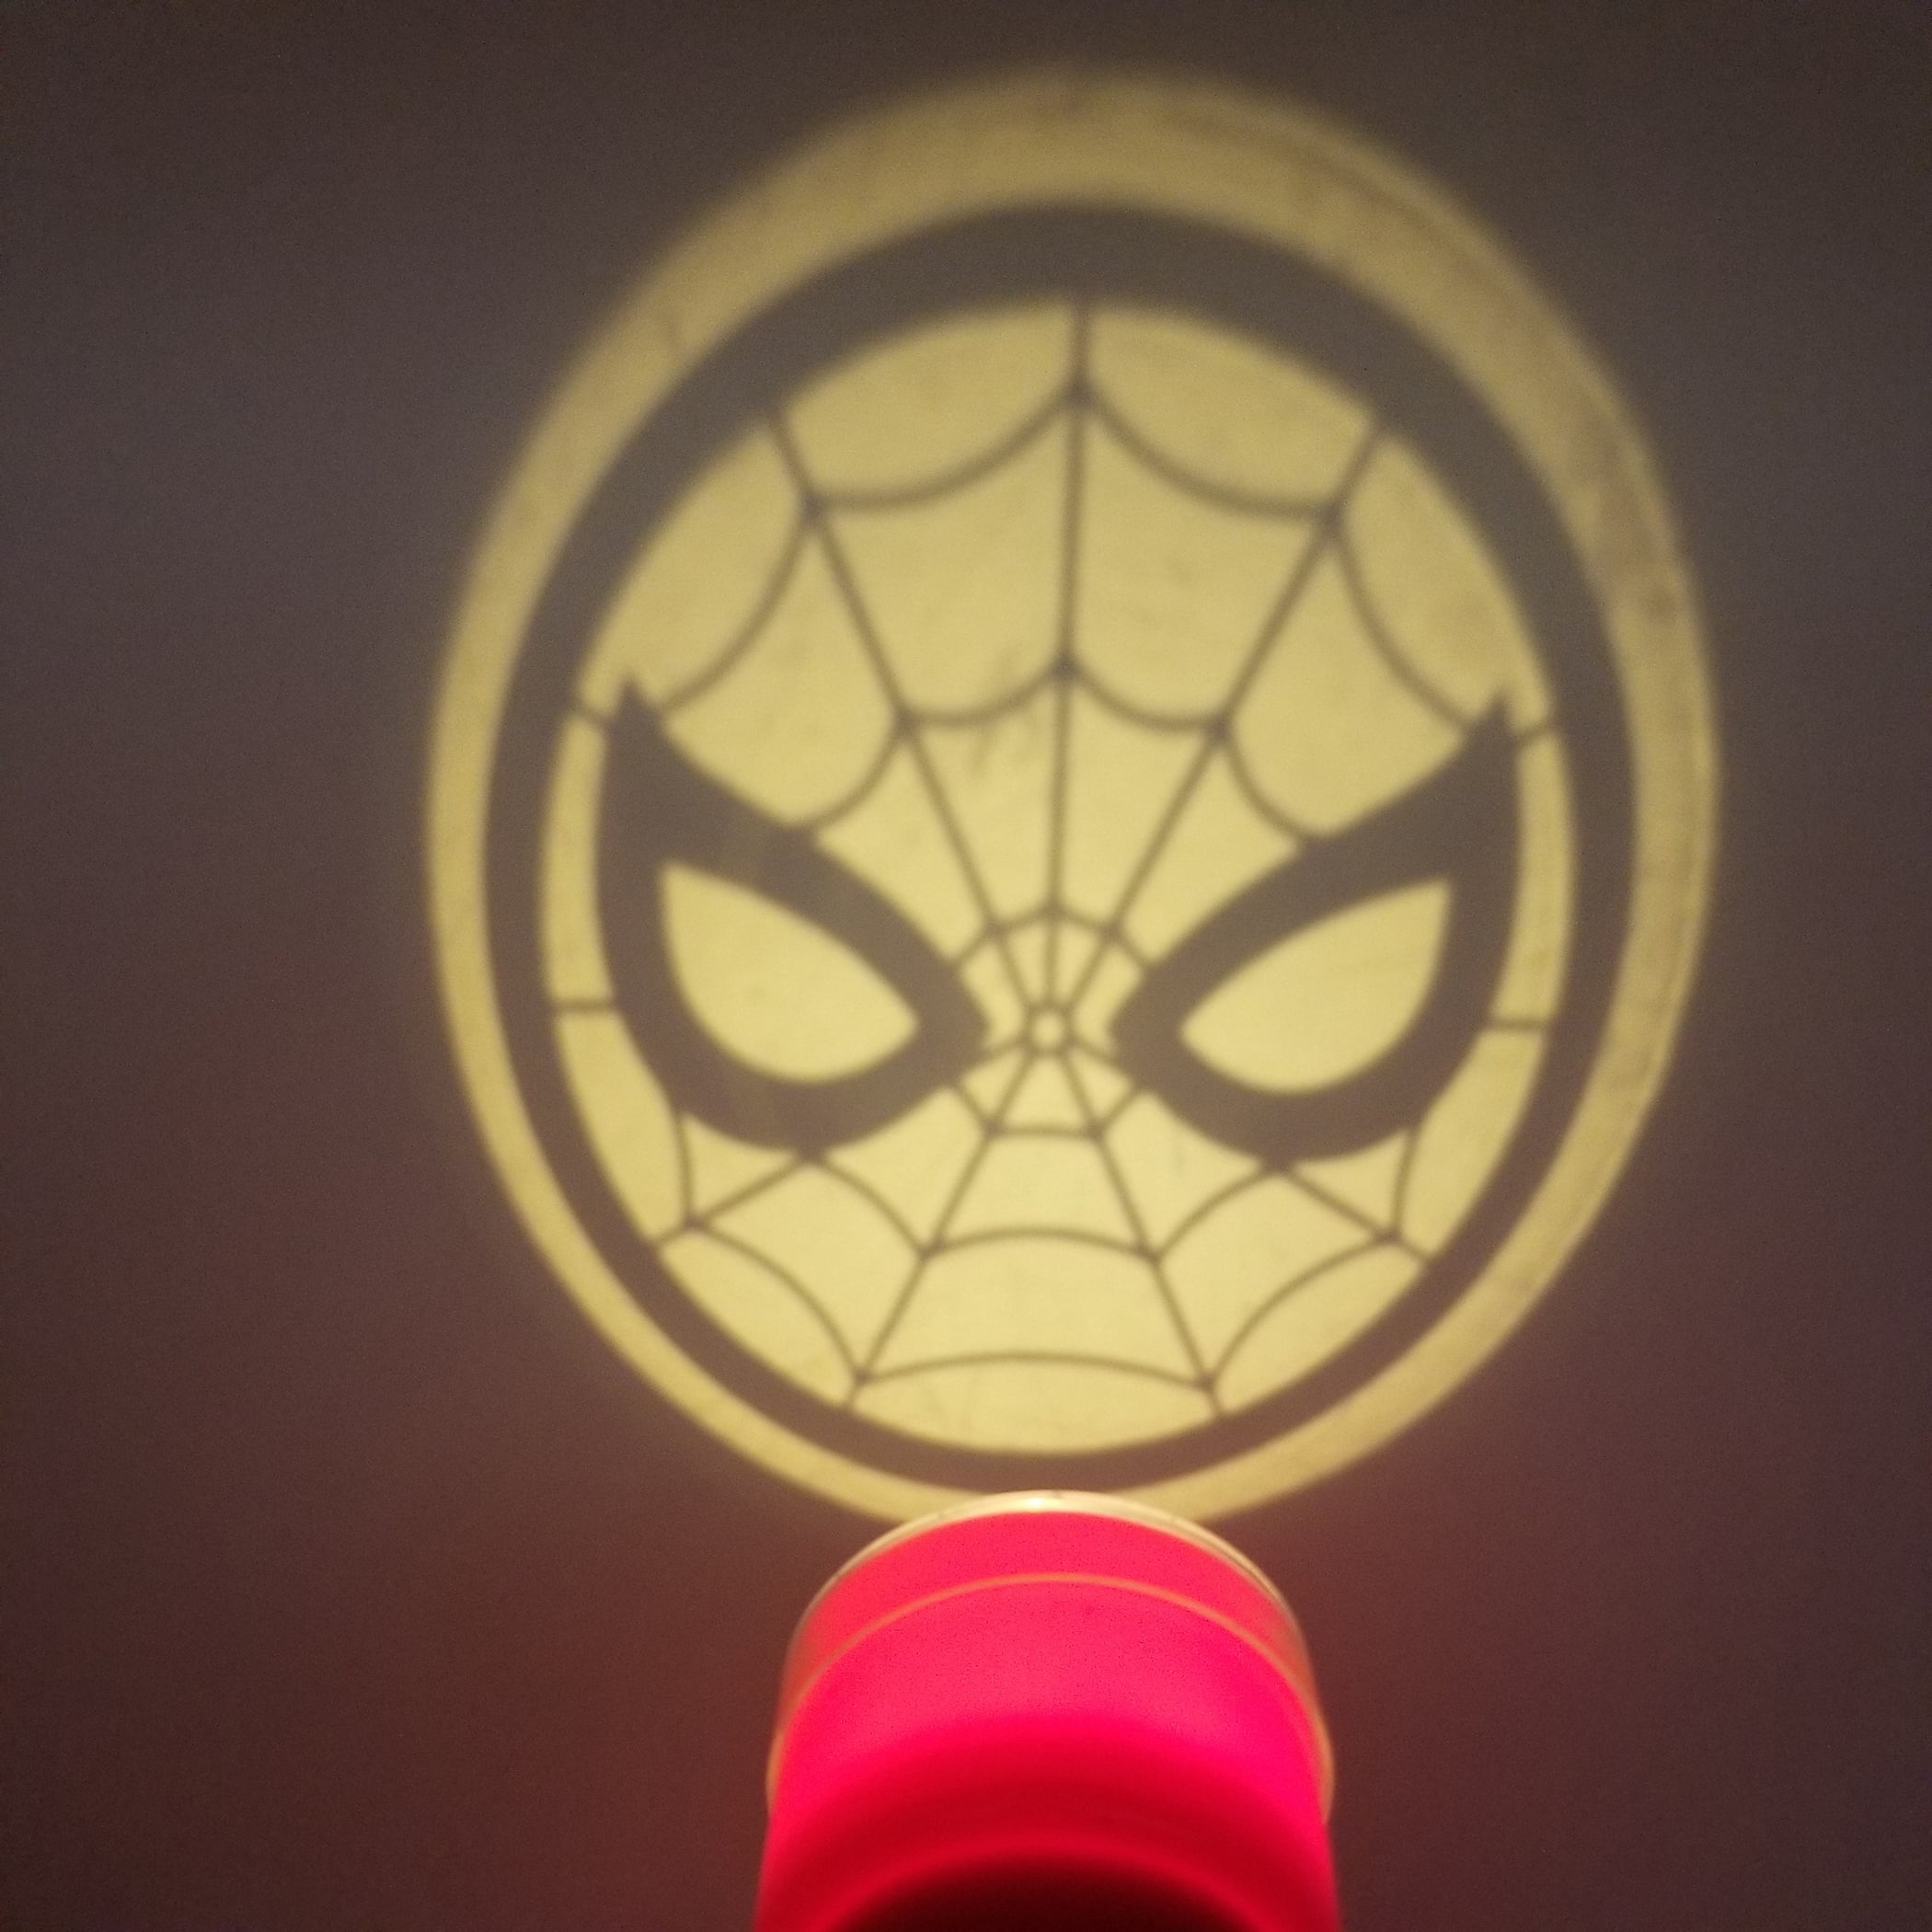 Spiderman Marvel Handheld Flashlight Projector Light with Character Lens Halloween Safety Trick or Treat Night Light or Play